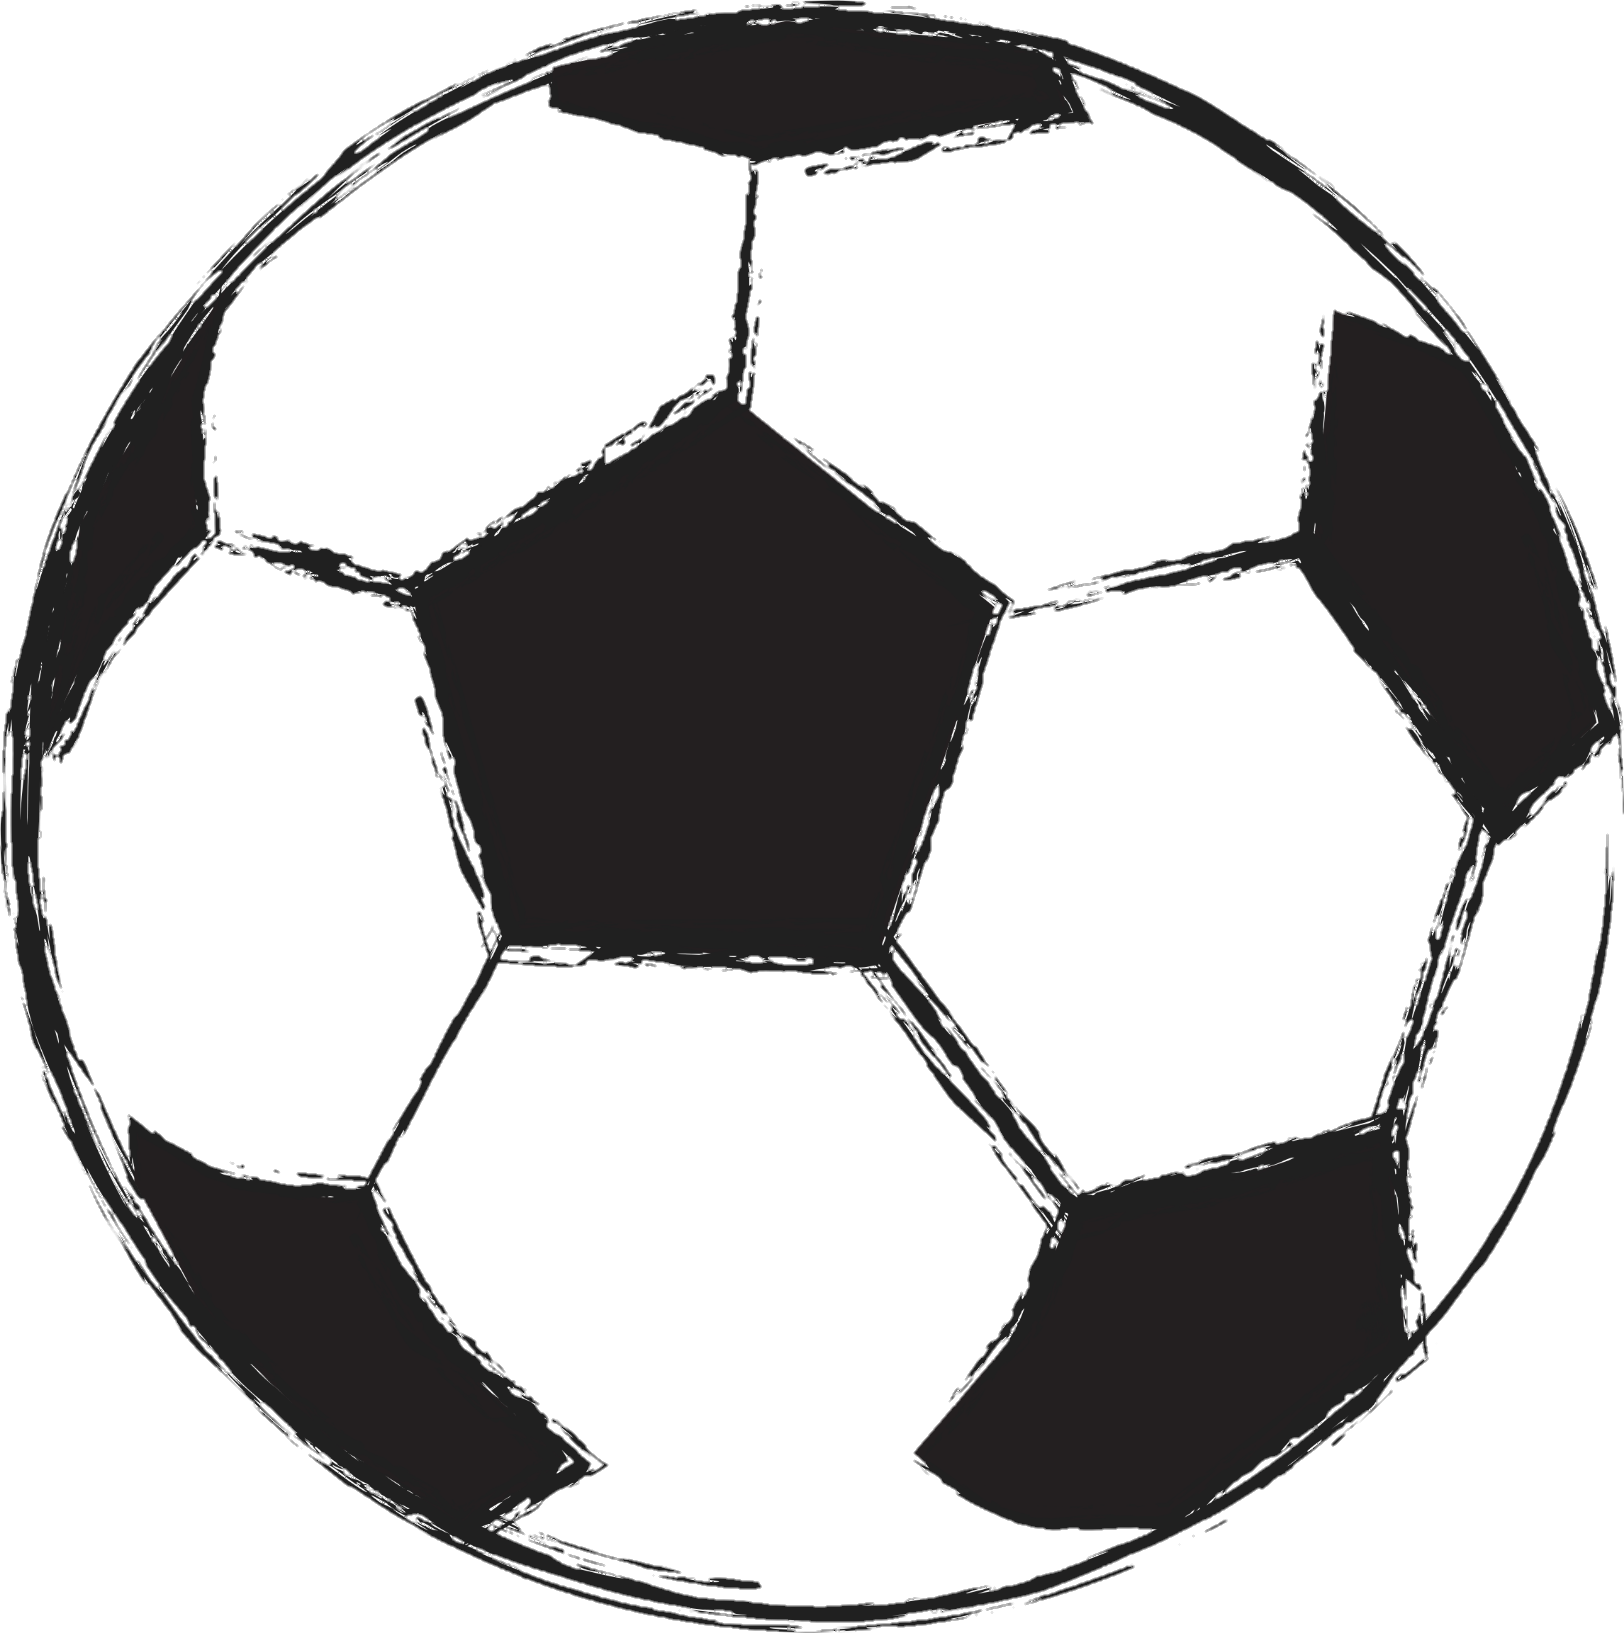 football-png-image-from-pngfre-21